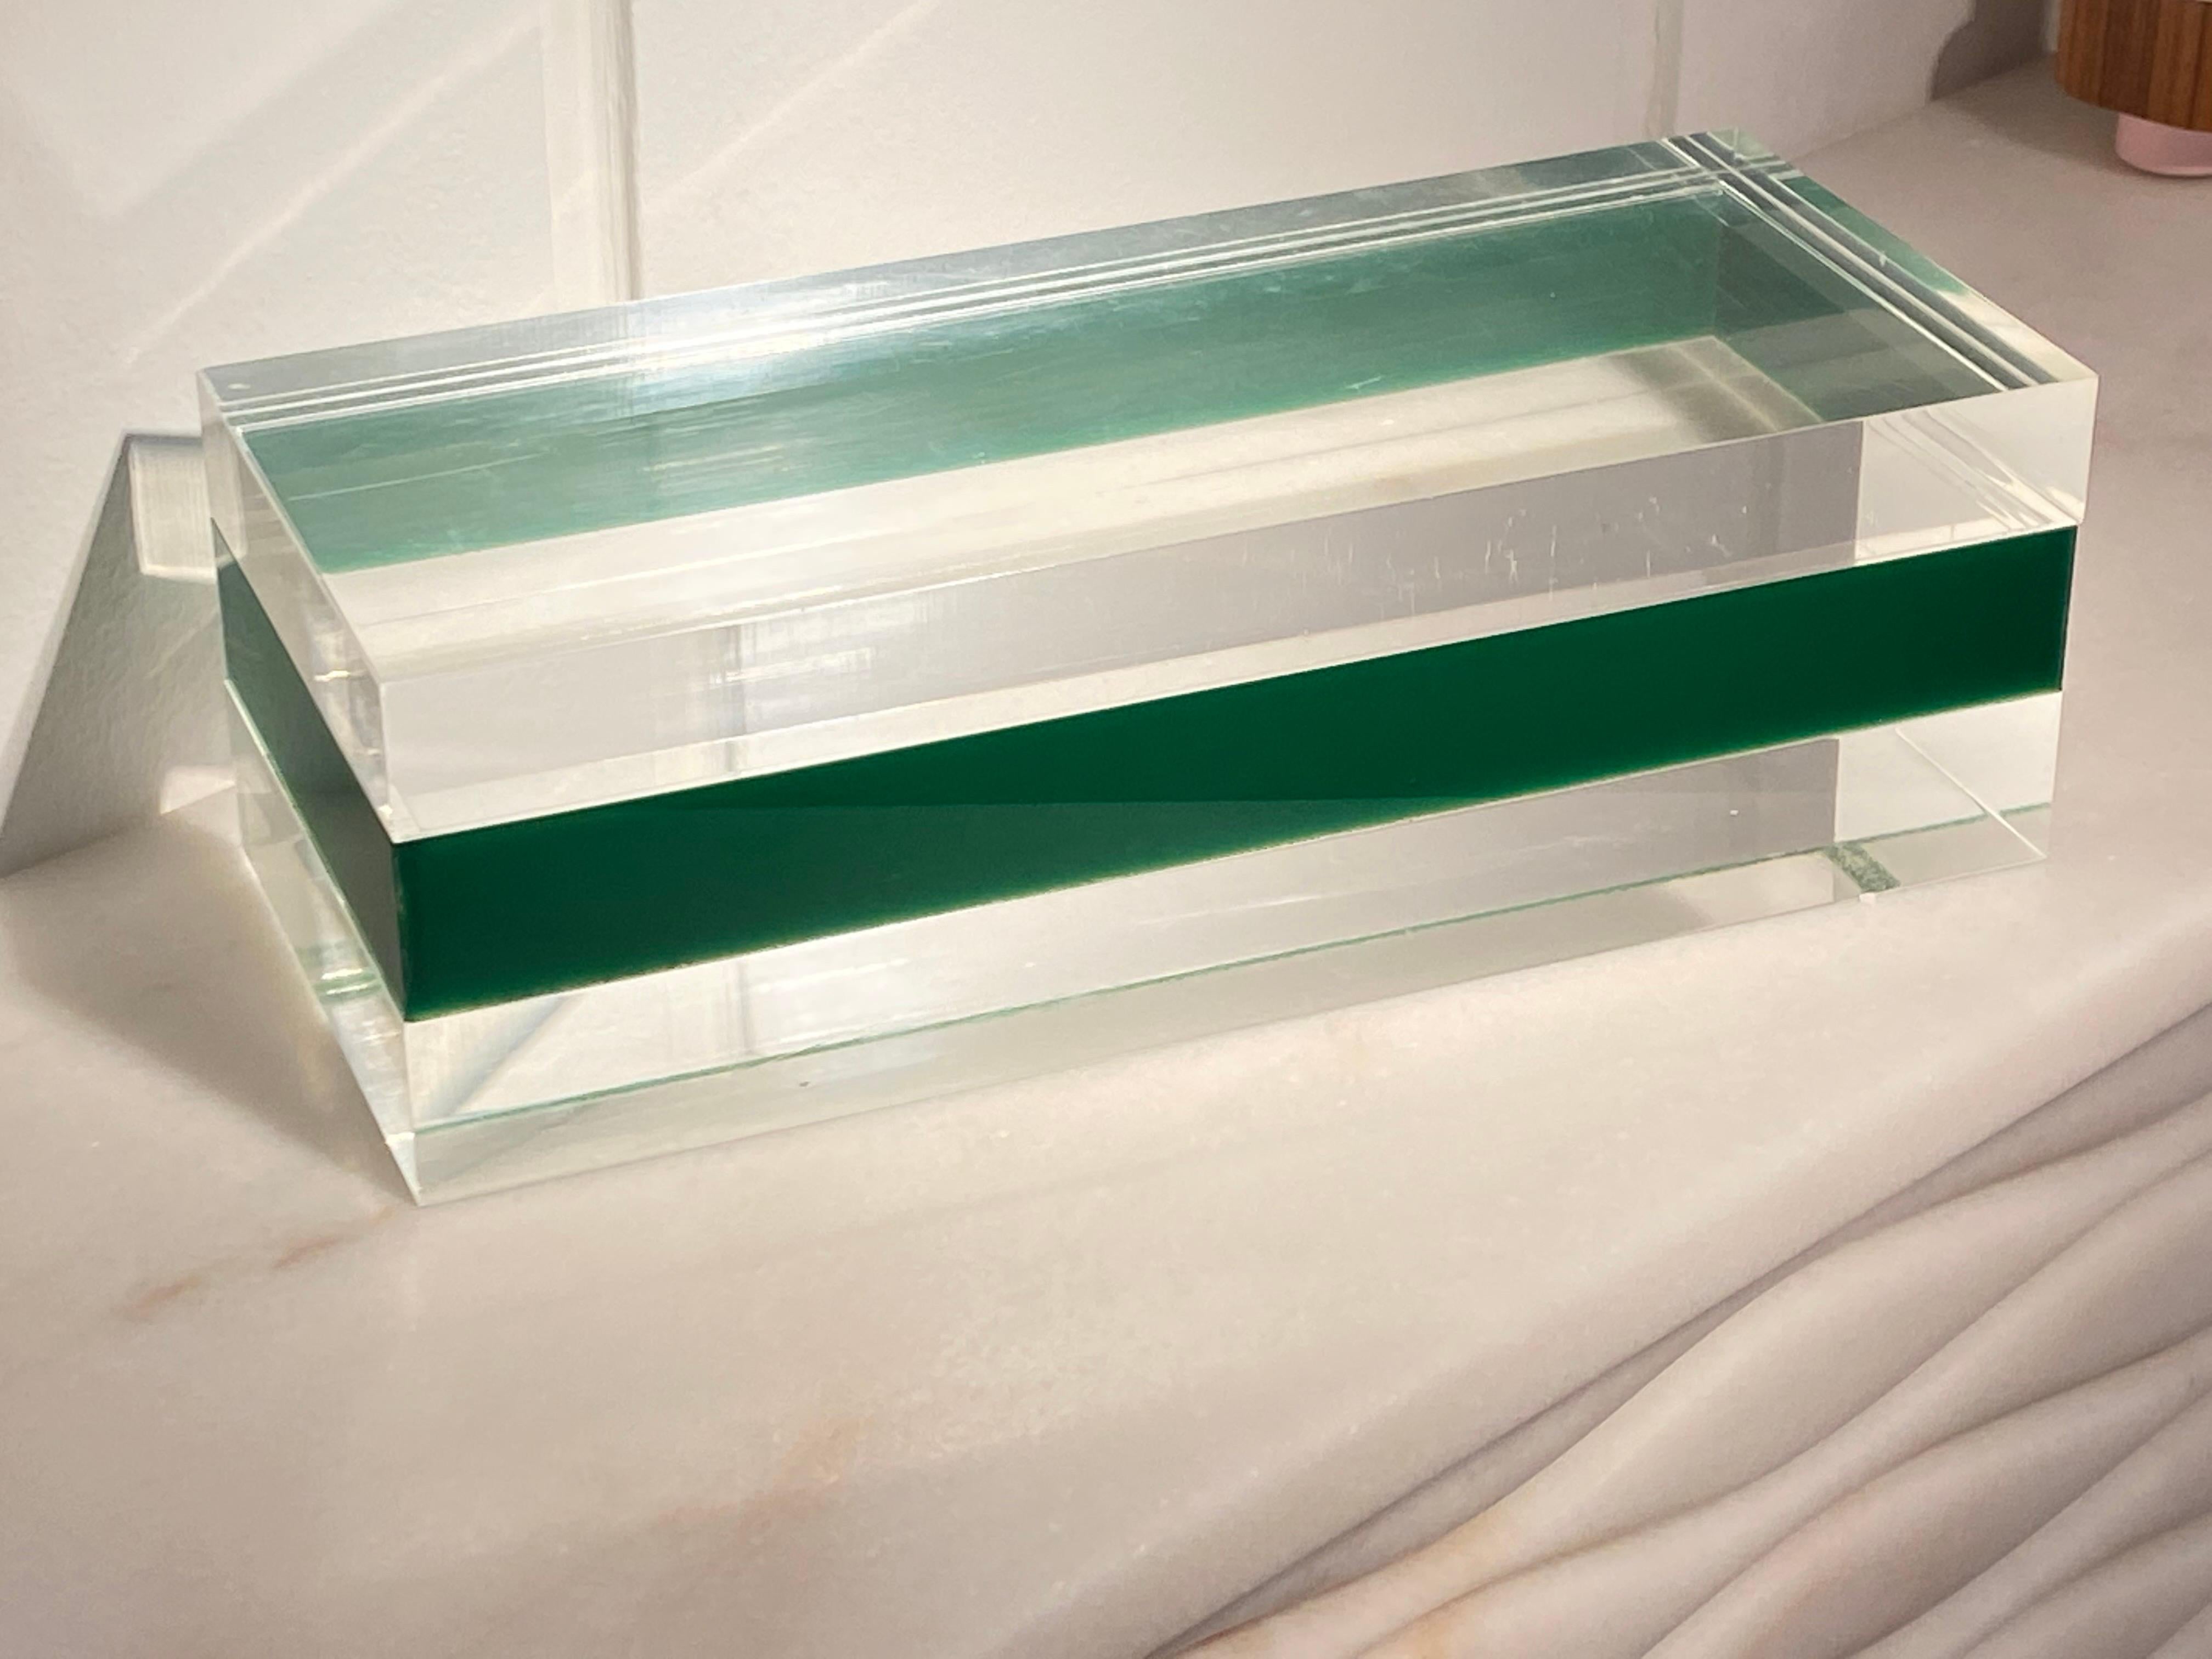 Large translucid and greed lucite Box By Alessandro Albrizzi
Italy 1970
Great condition.